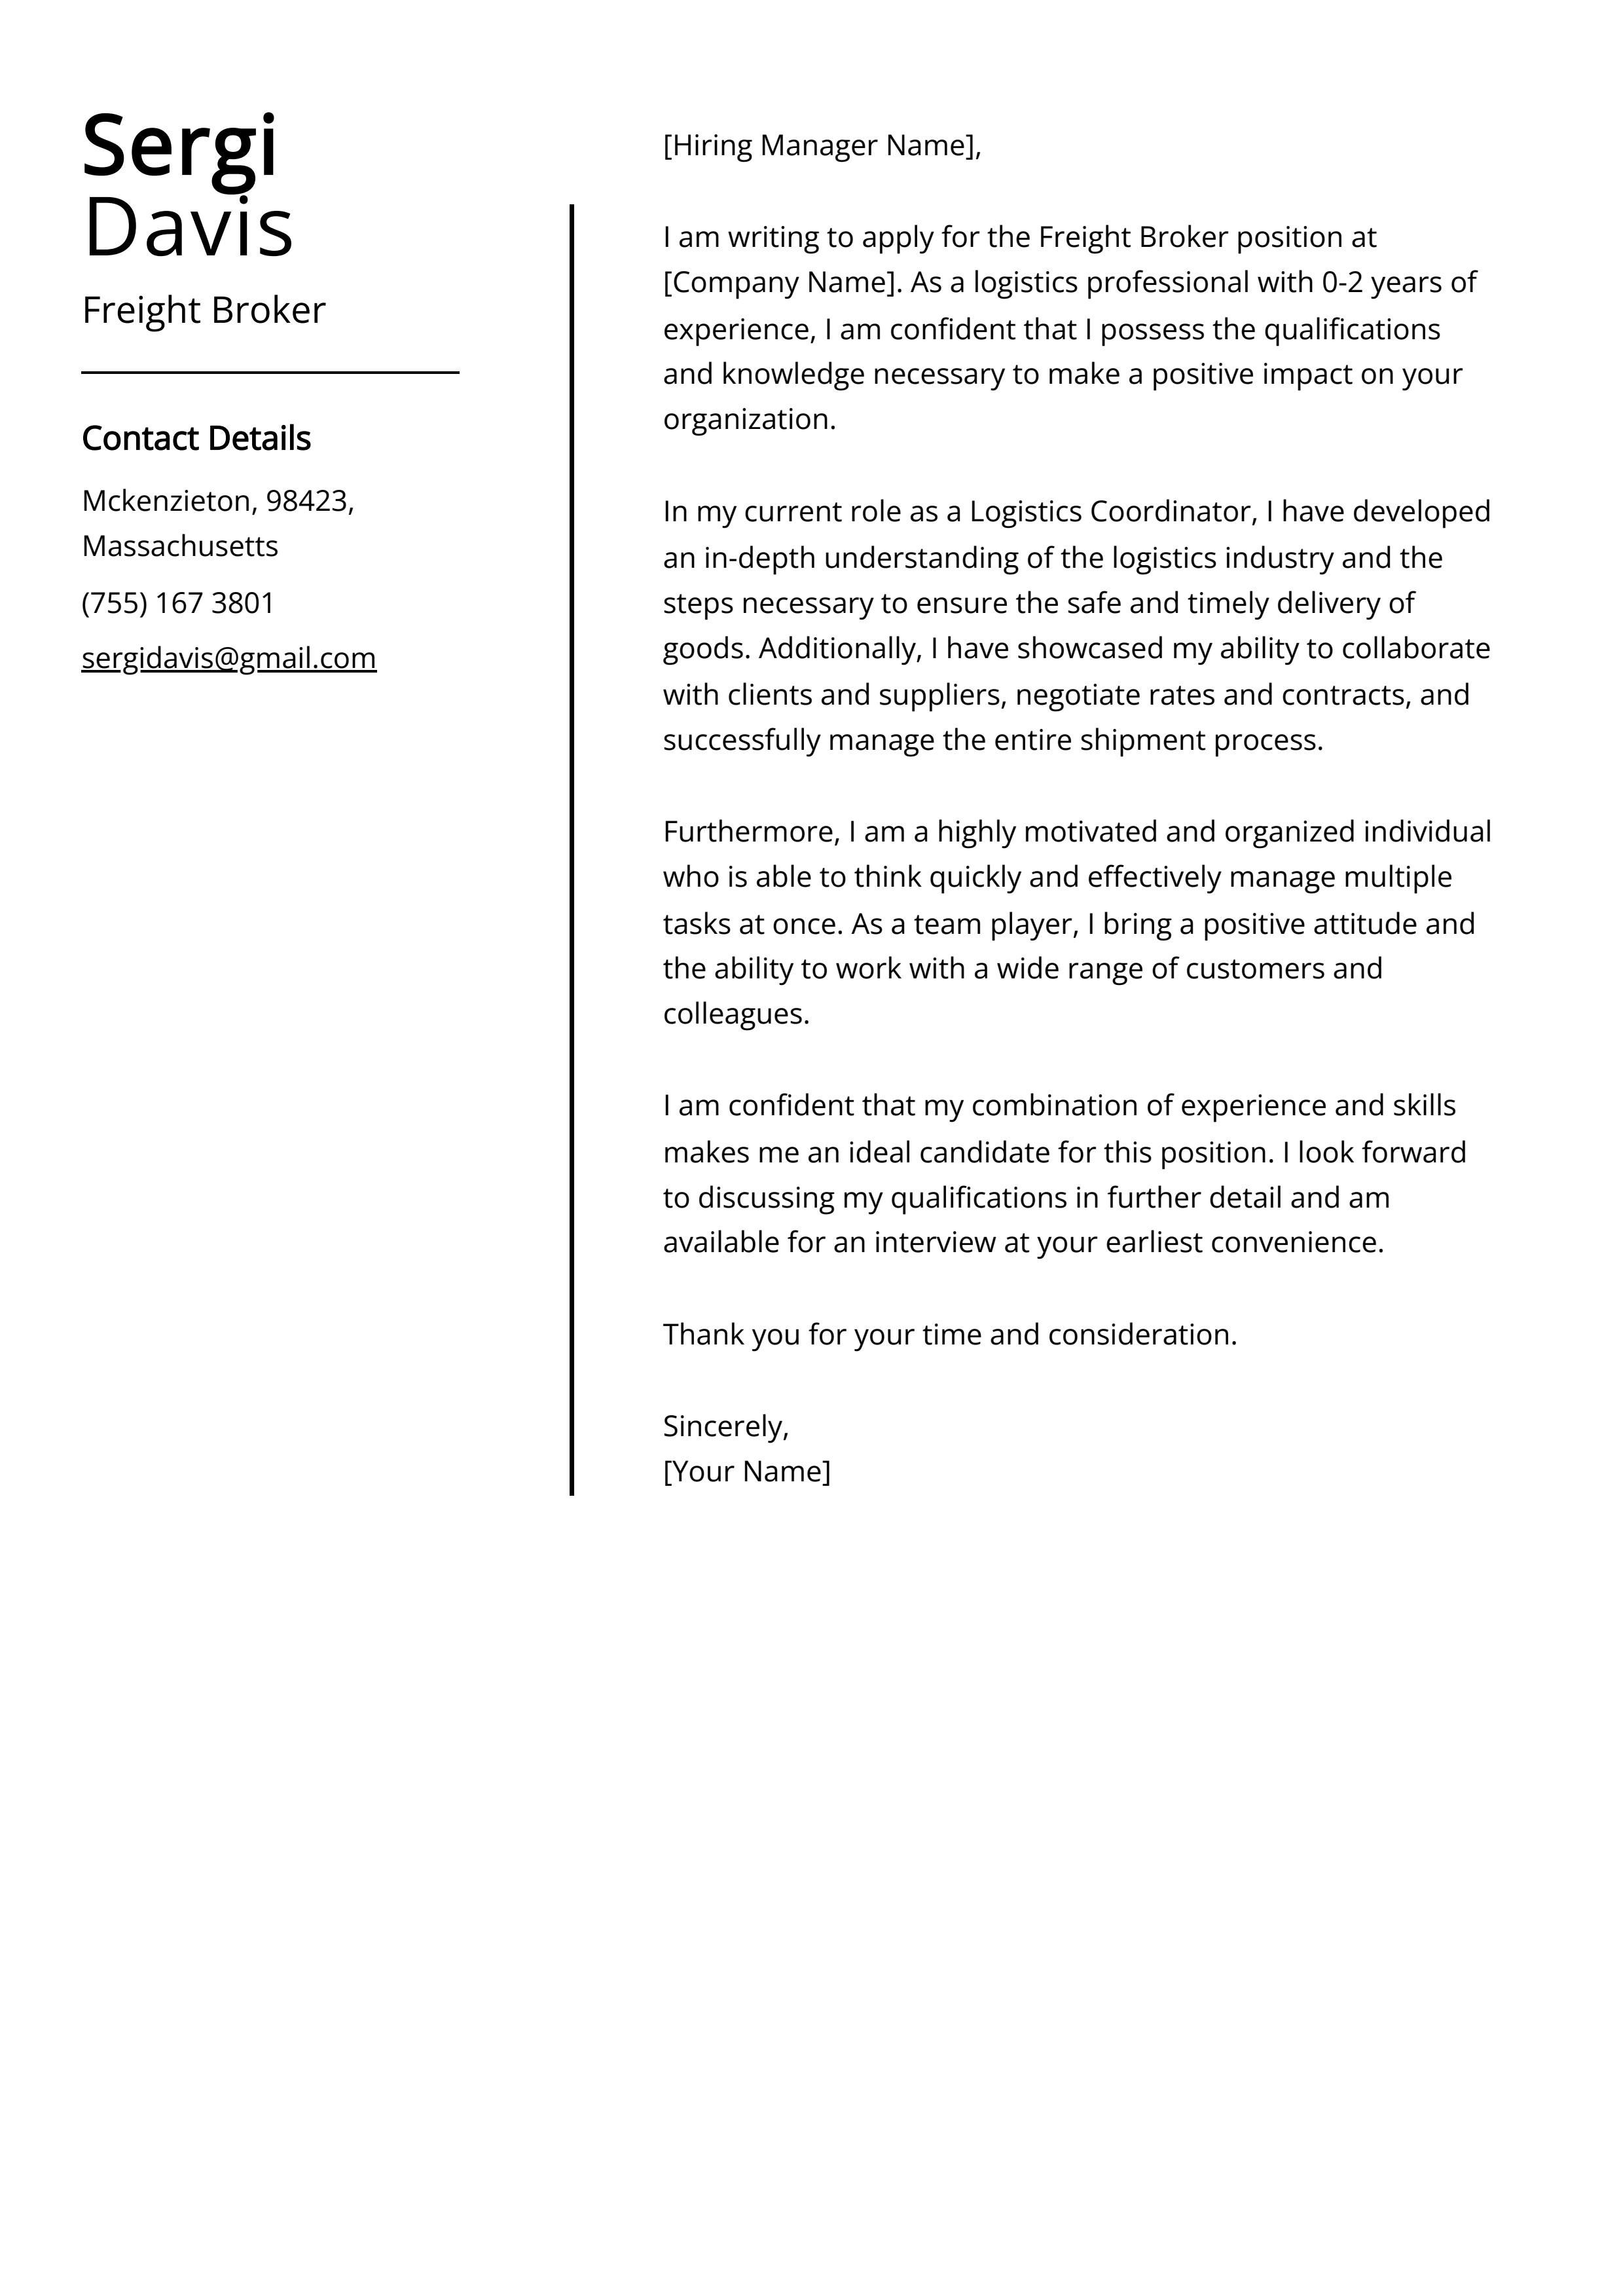 Freight Broker Cover Letter Example